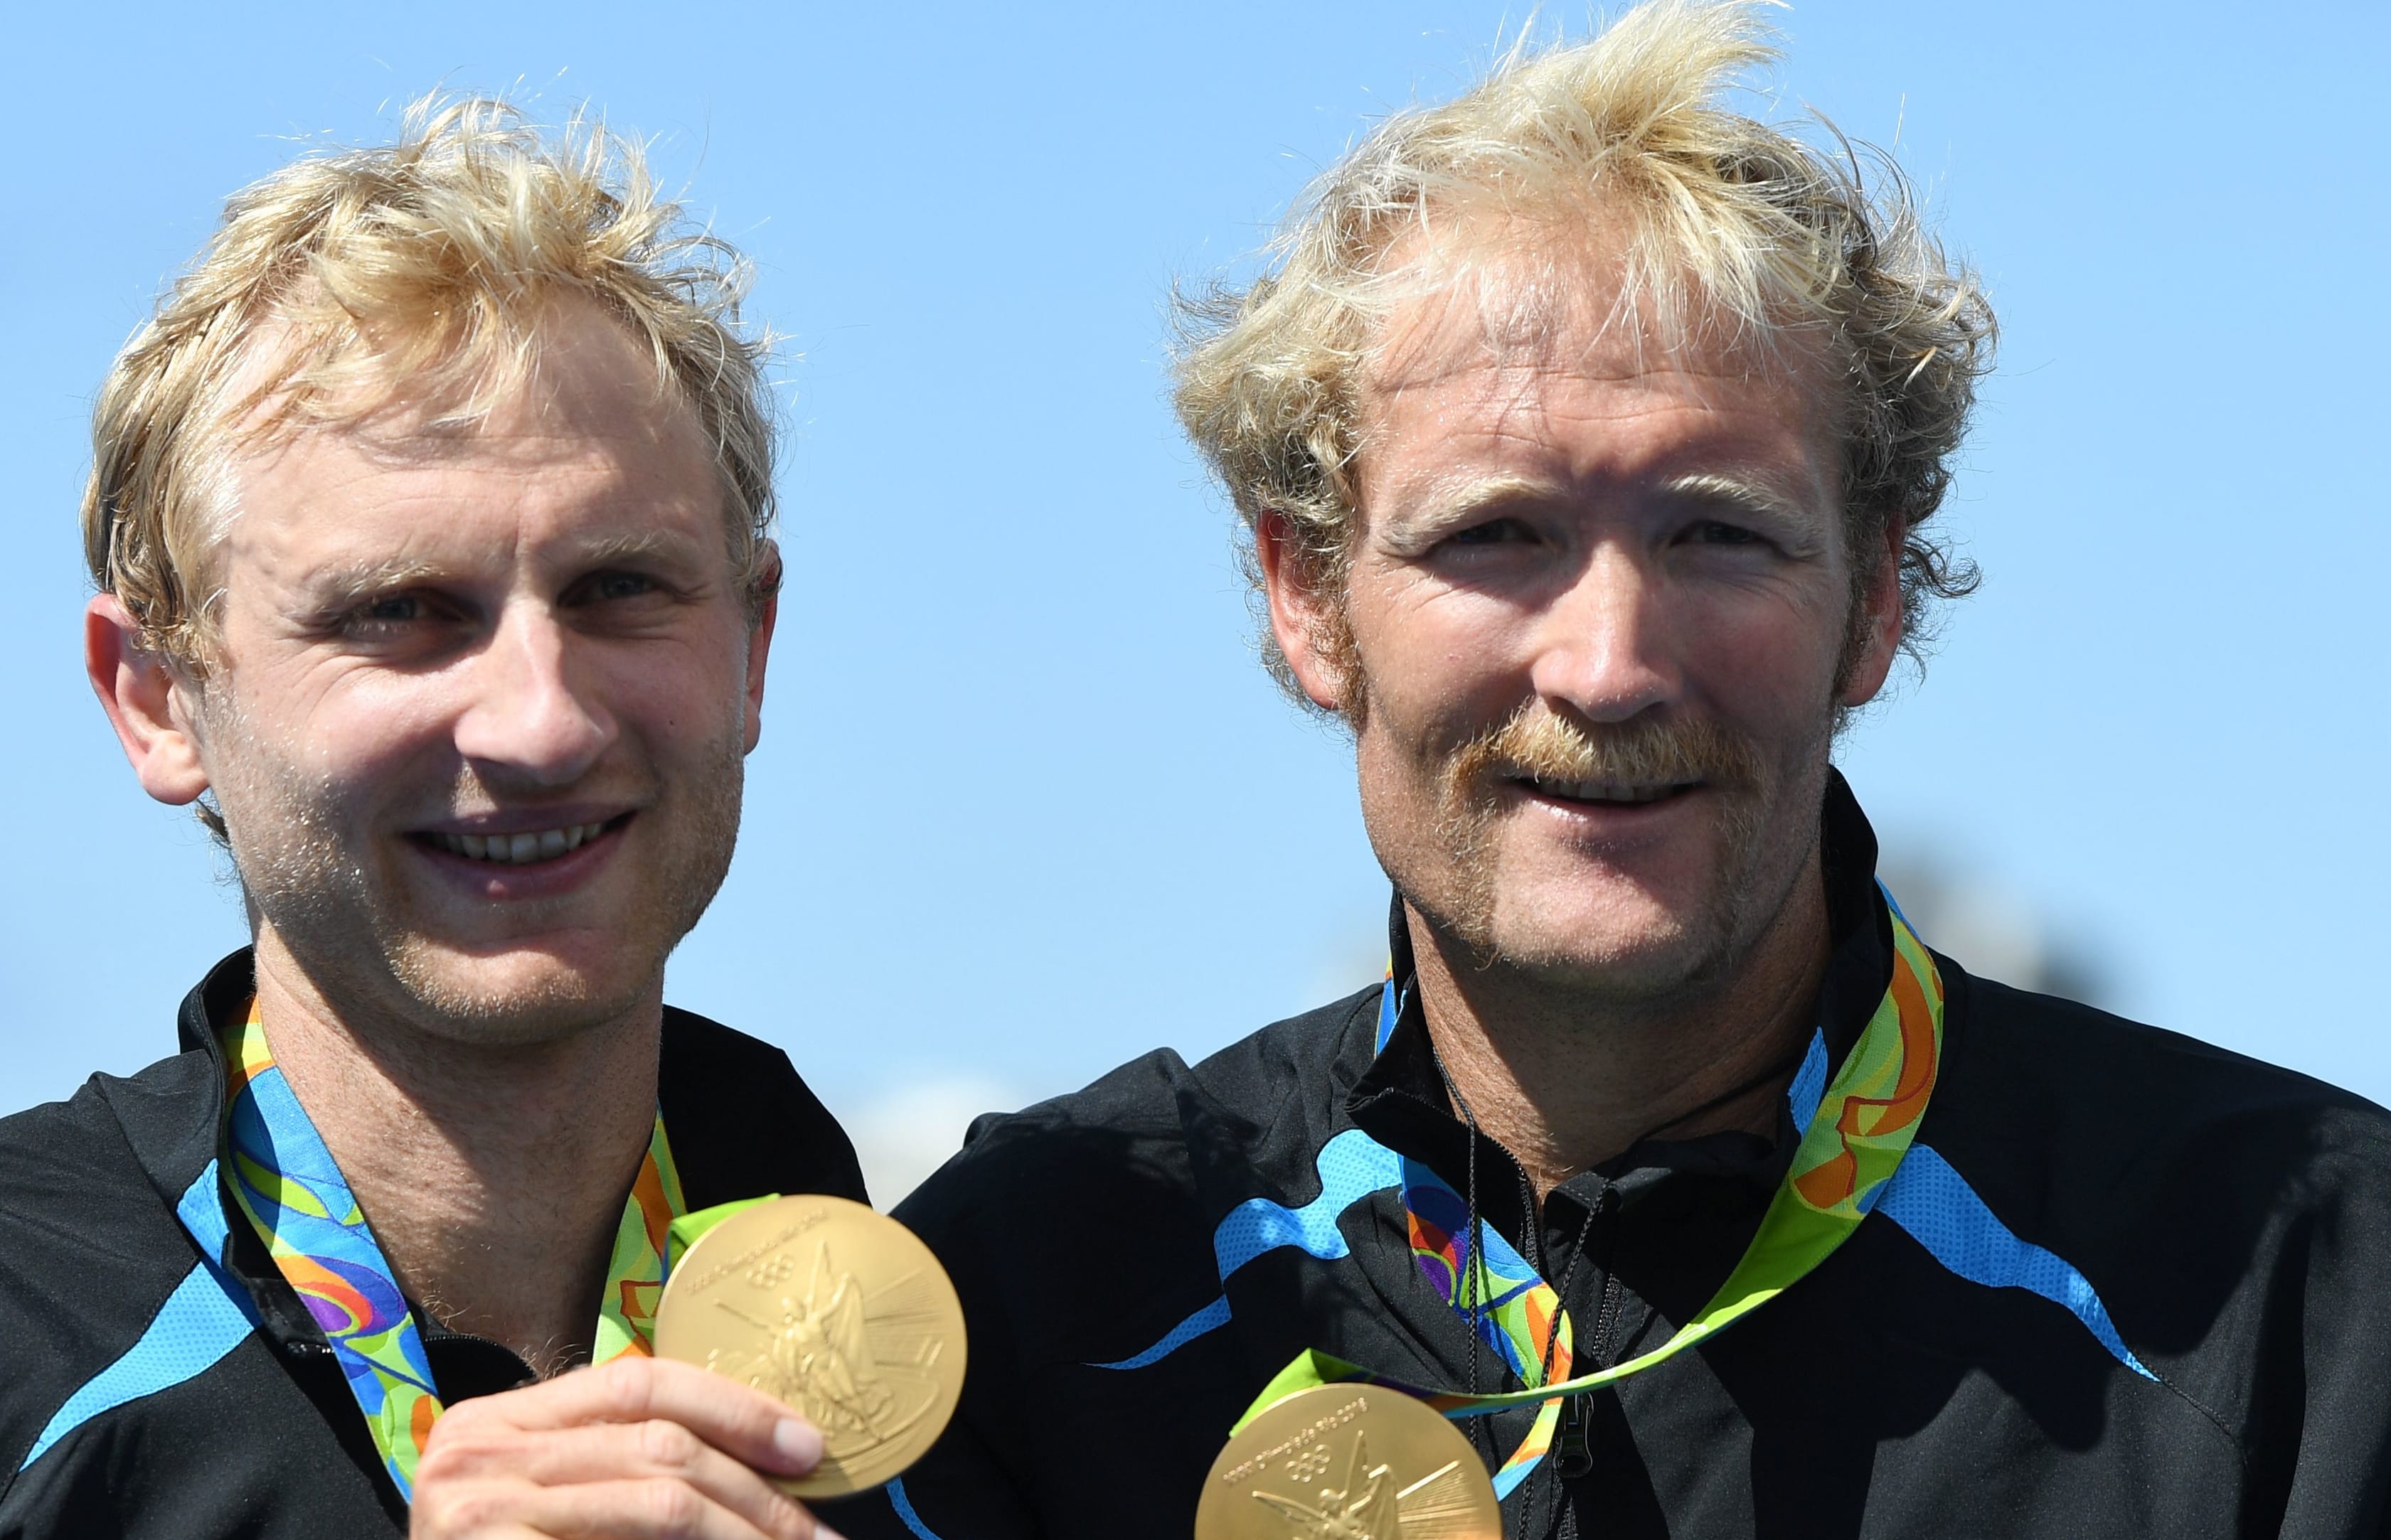 Hamish Bond, left, and Eric Murray celebrate with their gold medals on the podium after wining the Men's Pair Final of the Rowing events of the Rio 2016 Olympic Games at Lagoa Stadium in Rio de Janeiro, Brazil, 11 August 2016.